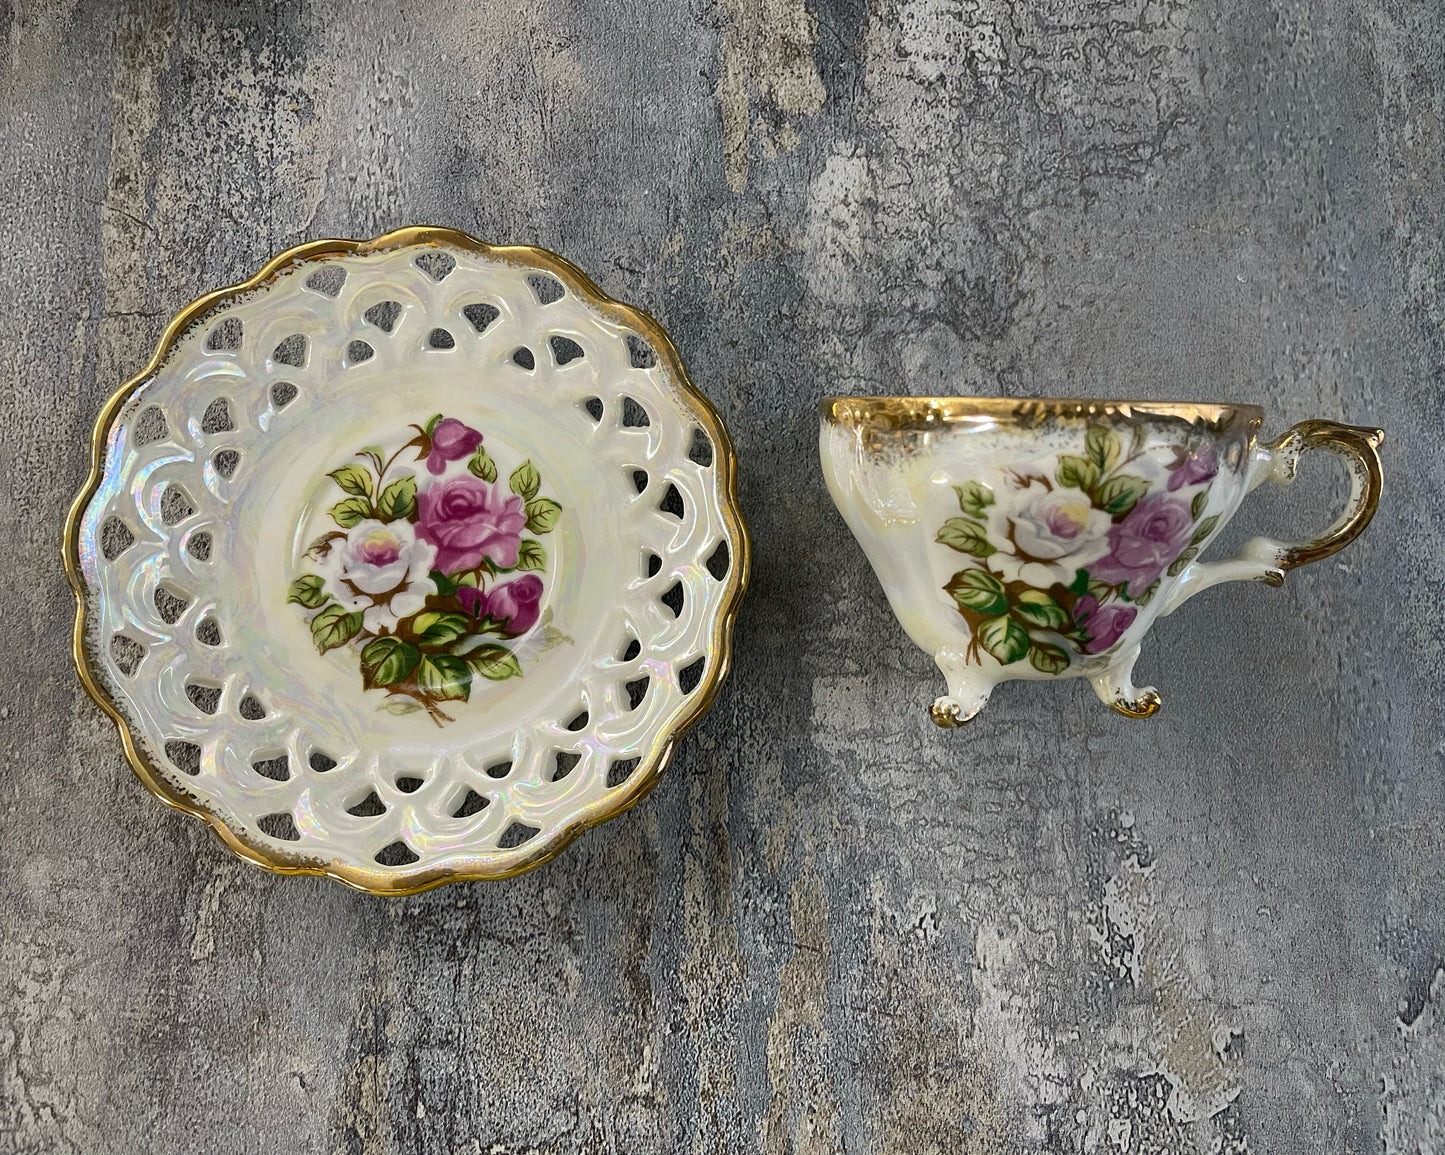 Vintage hand painted rose demitasse and saucer